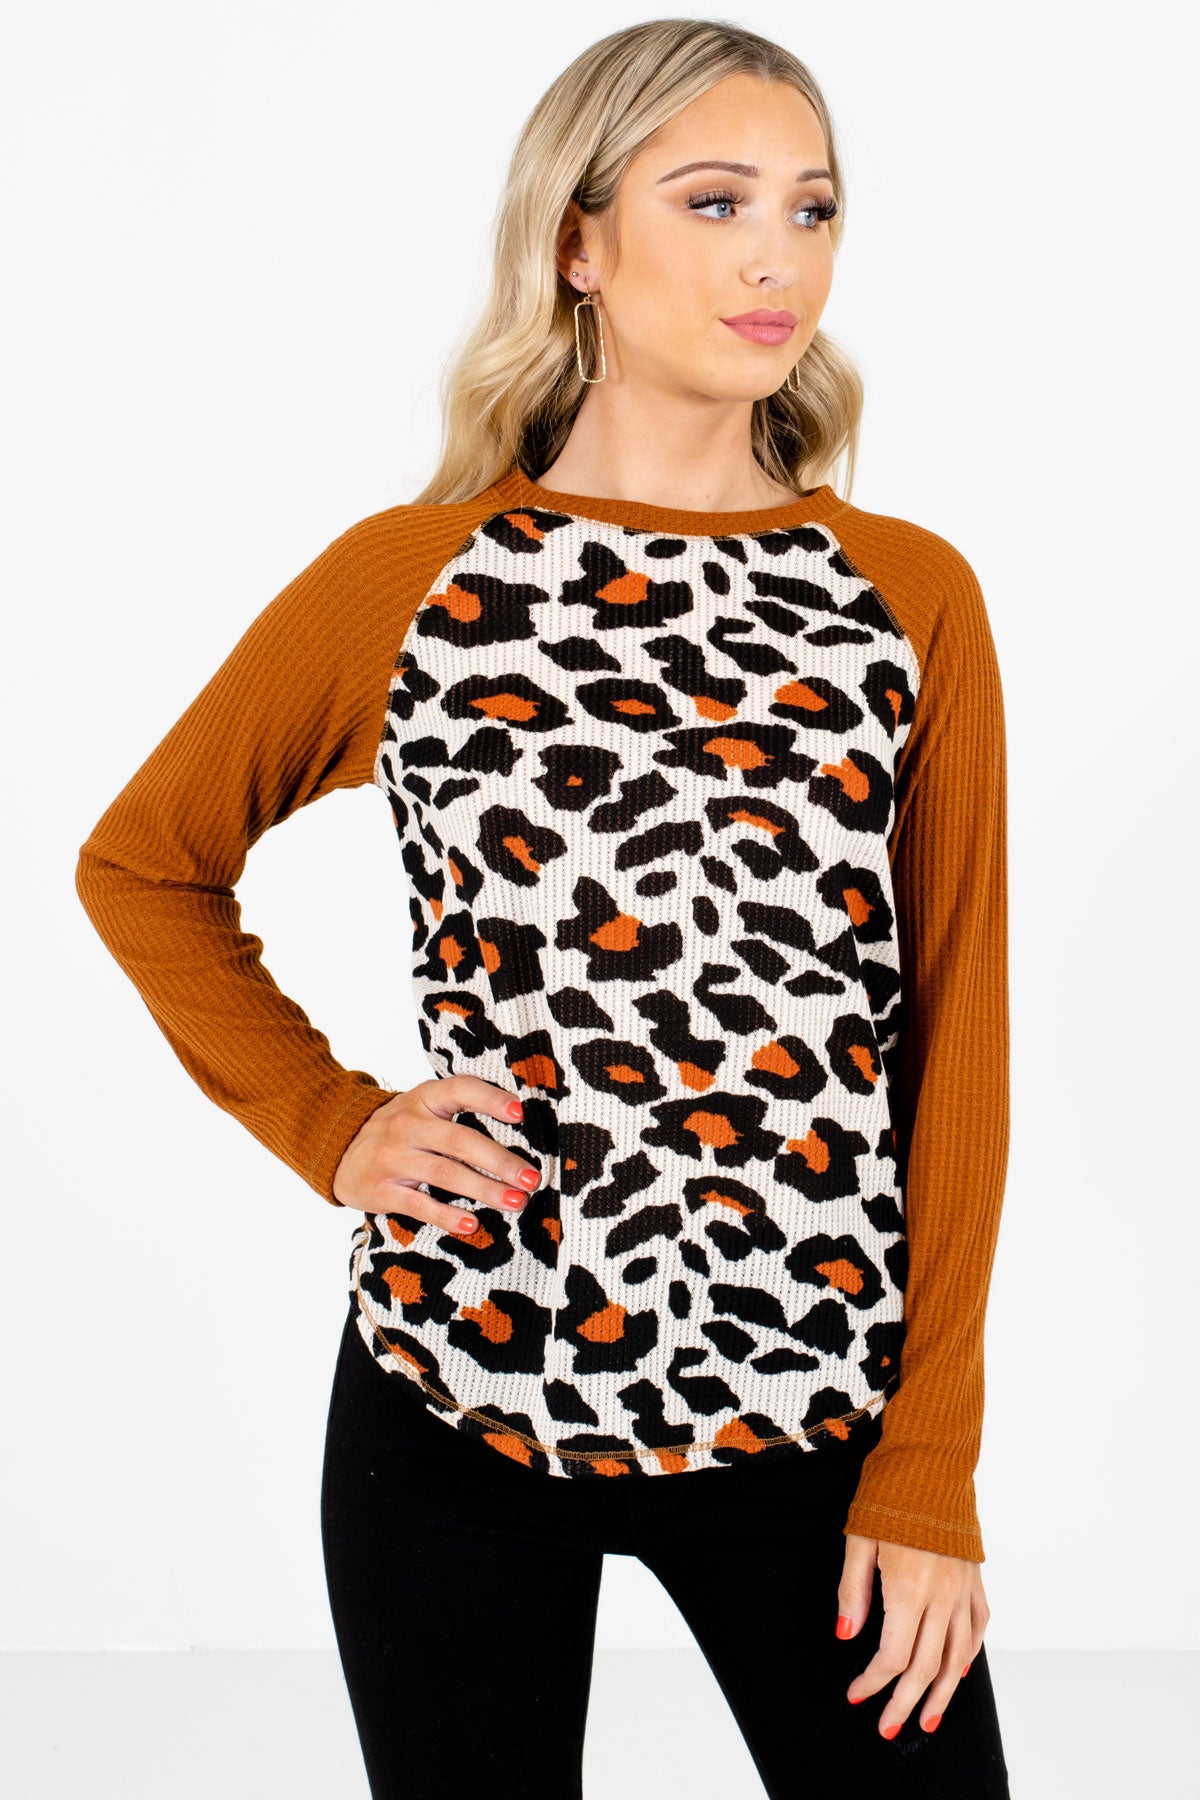 Cream and Orange Leopard Print Pattern Boutique Tops for Women